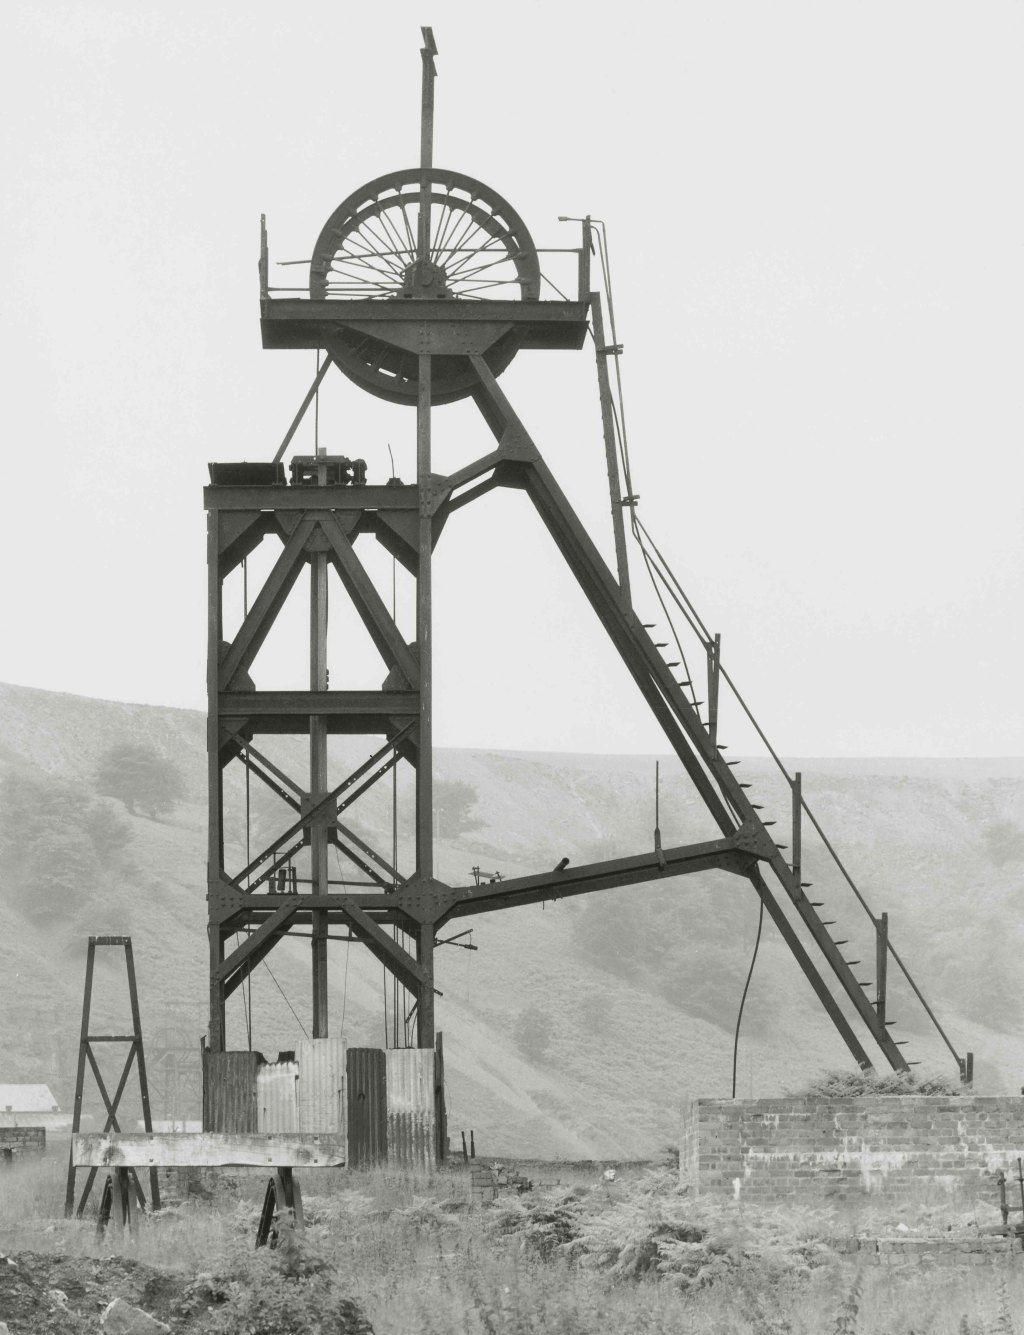 A black and white photo of a colliery in Pontypool, South Wales